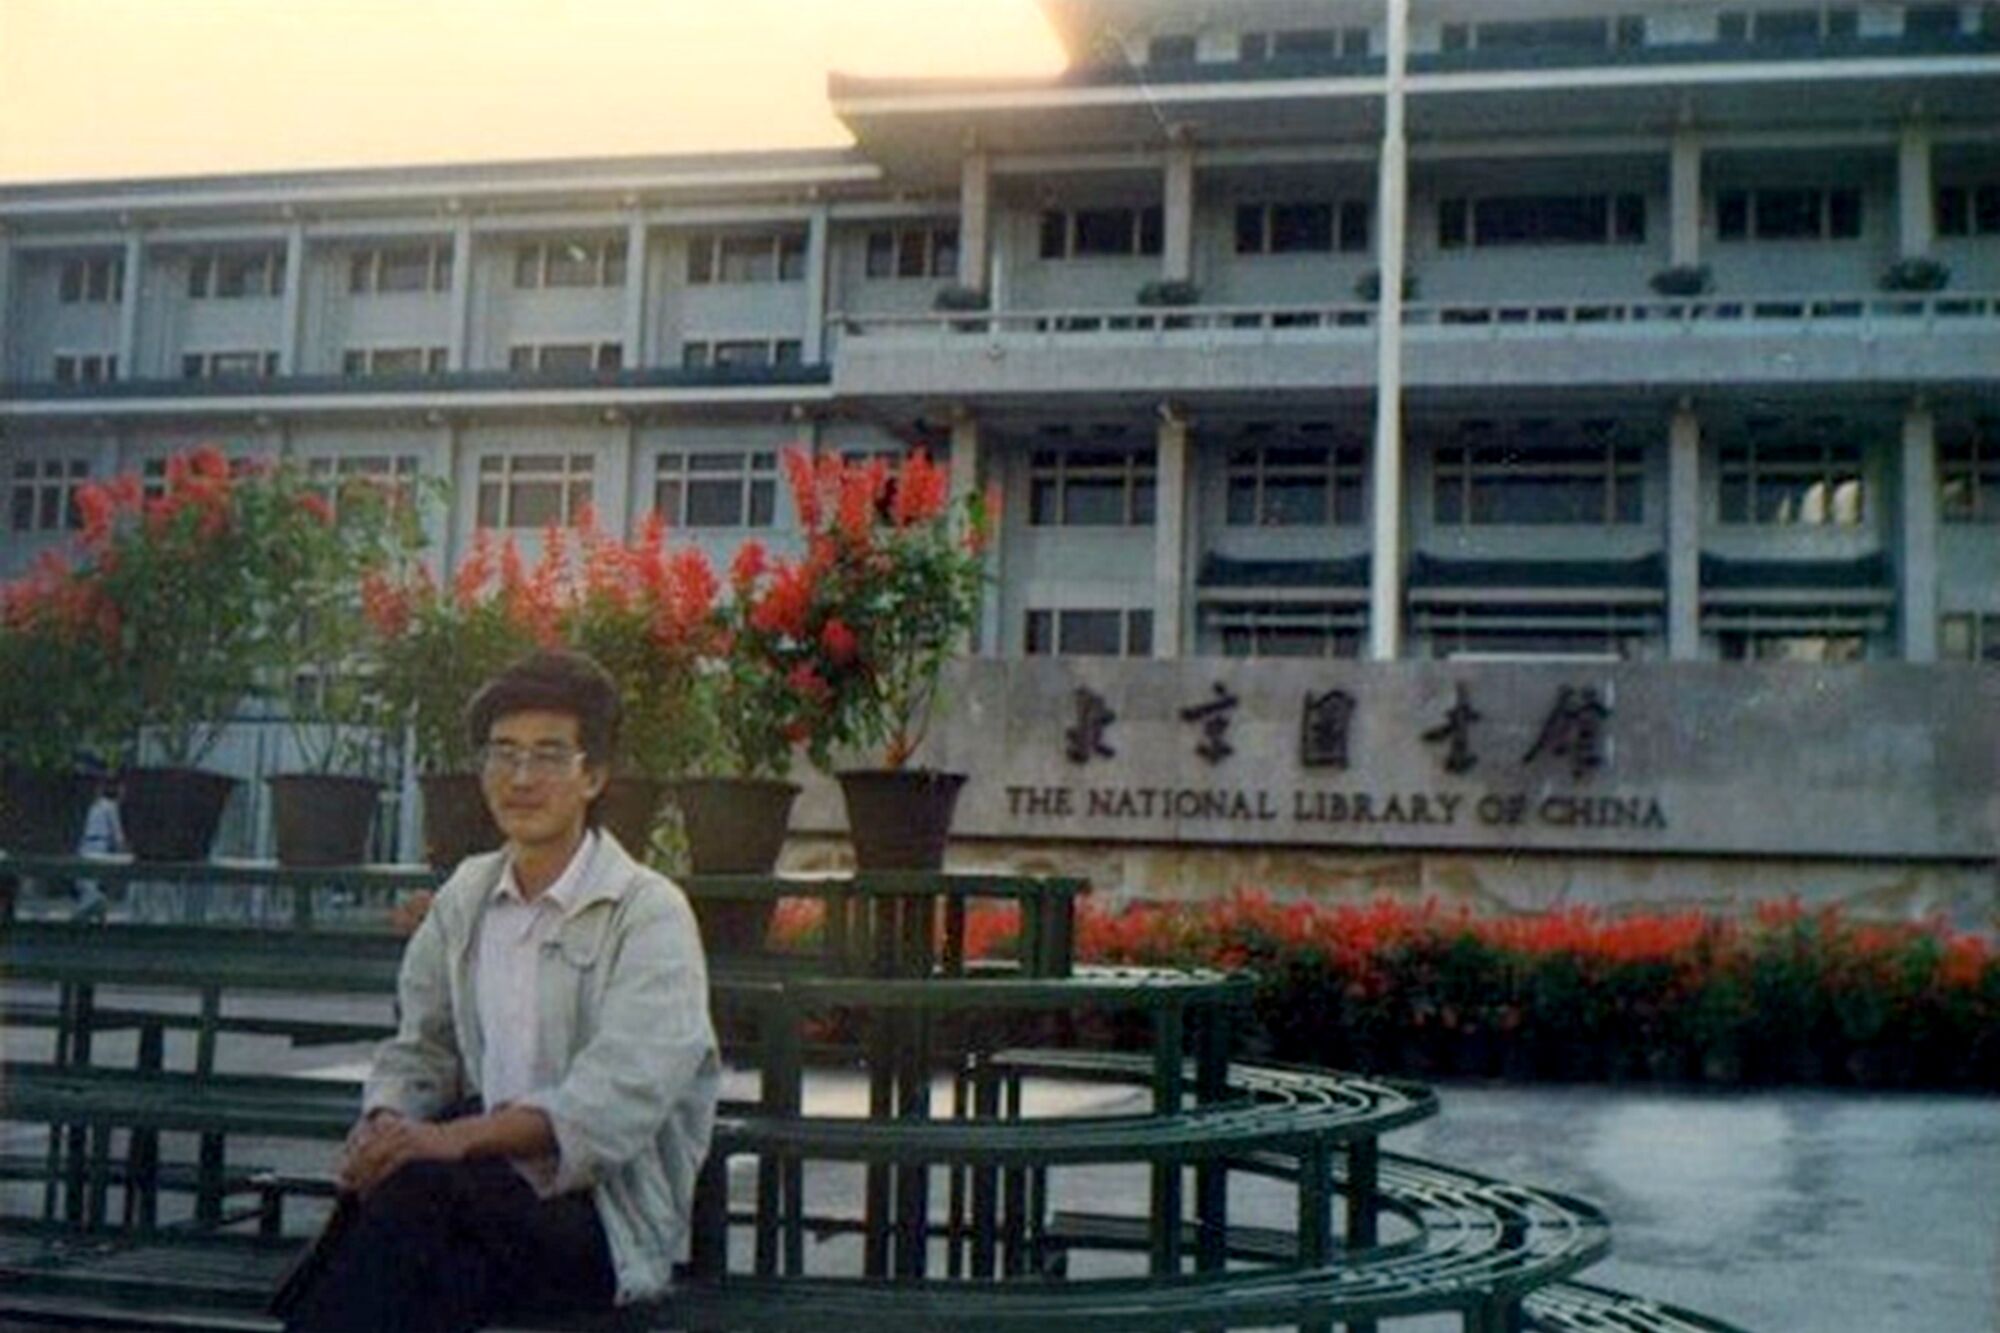 Lu Chunlin, a graduate student, was killed during the Tiananmen Square protests in 1989. He was 27 years old at the time.